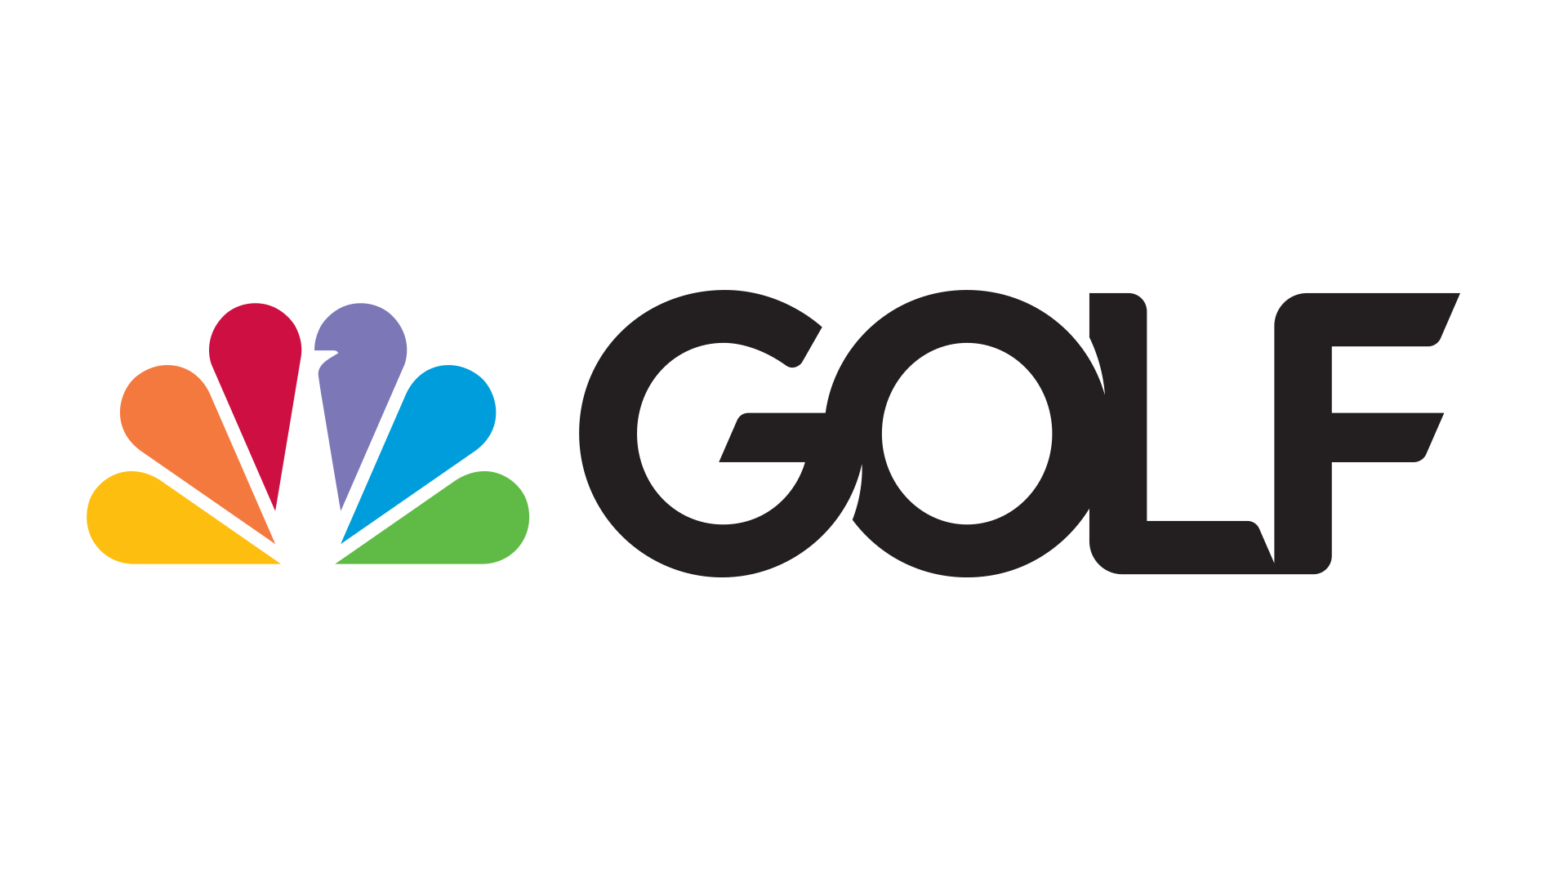 kevin-kisner-to-serve-as-analyst-for-nbc-sports’-pga-tour-coverage-at-the-sentry-and-wm-phoenix-open